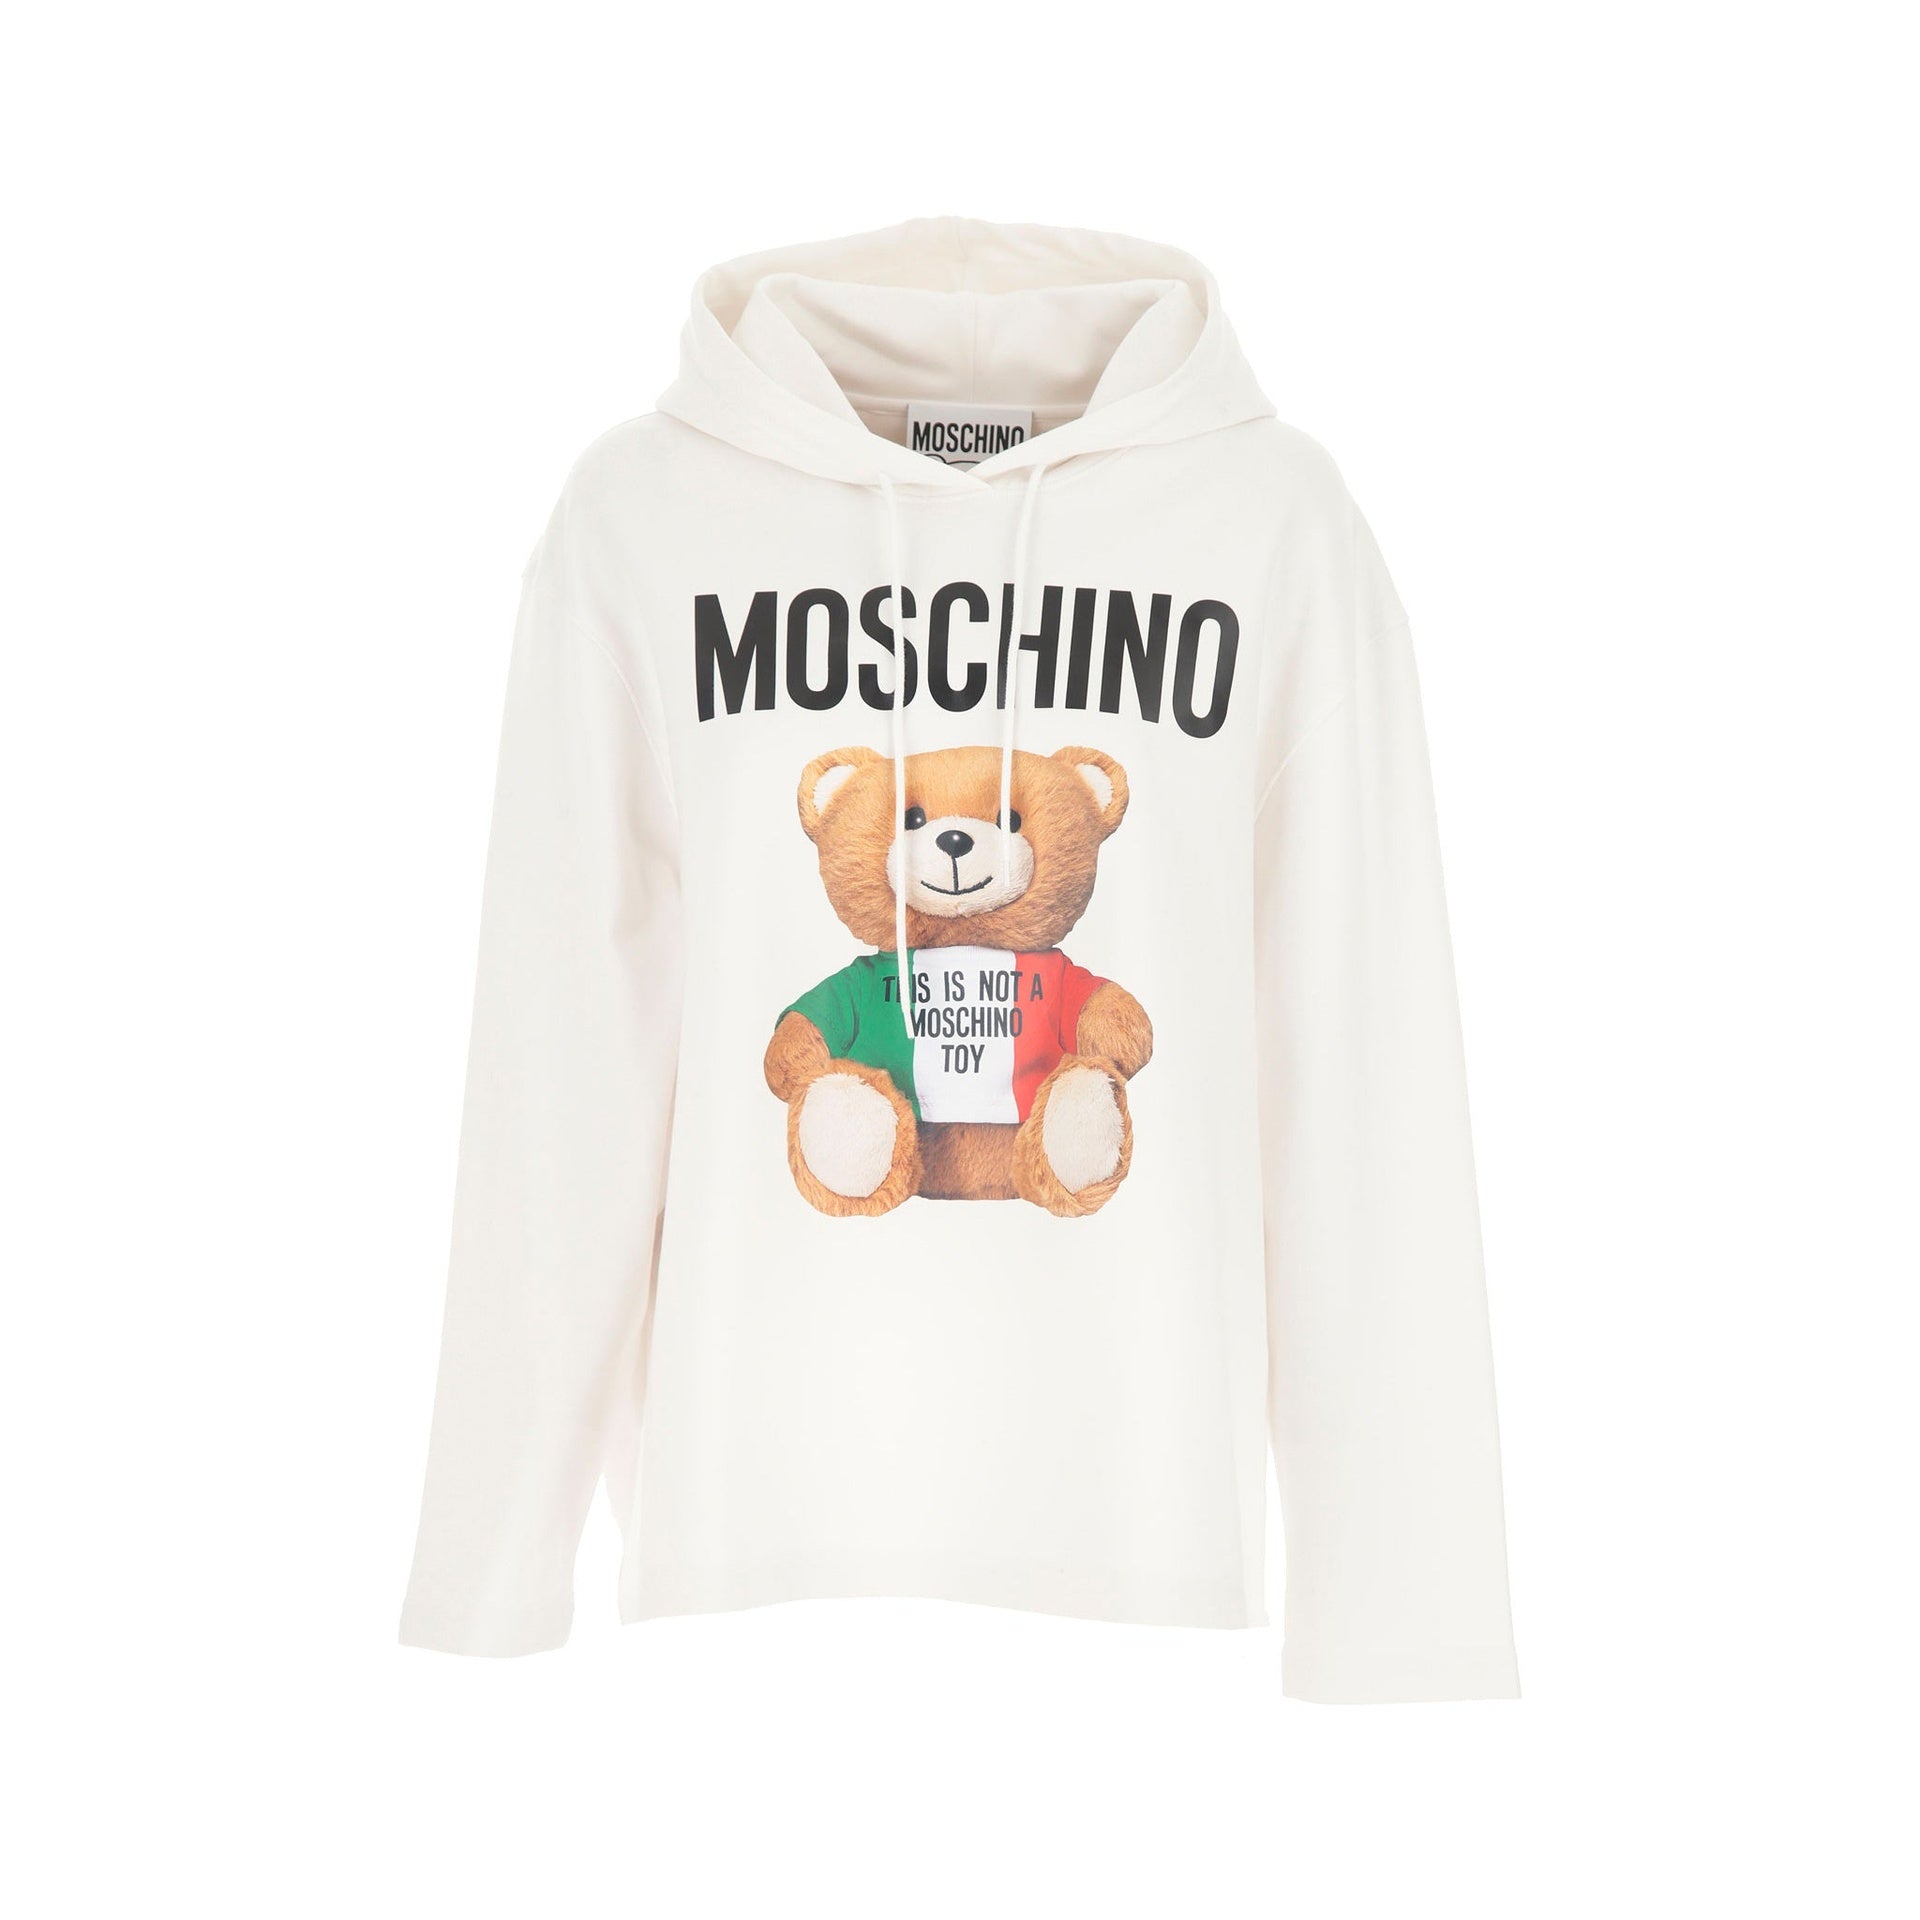 MOSCHINO-COUTURE-OUTLET-SALE-Moschino-Couture-Logo-Hooded-Sweatshirt-Shirts-WHITE-42-ARCHIVE-COLLECTION.jpg